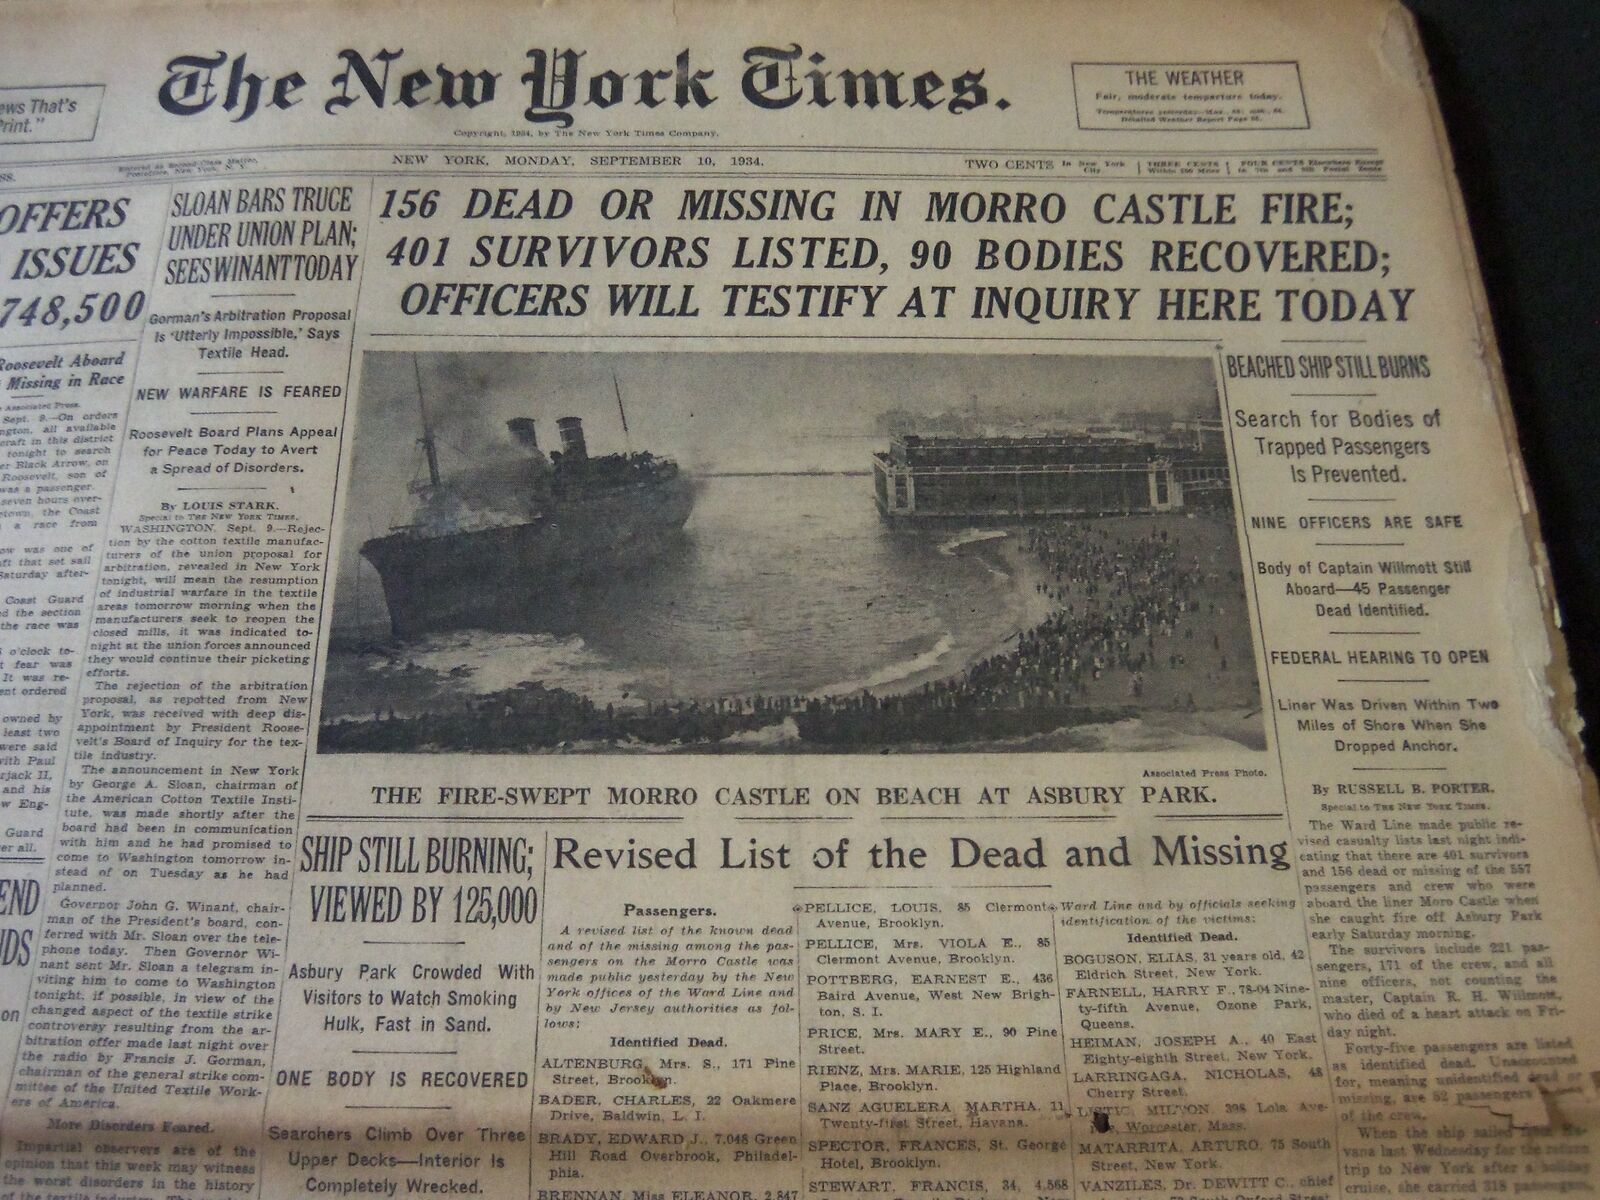 1934 SEPT 10 NEW YORK TIMES - 156 DEAD OR MISSING IN MORRO CASTLE FIRE - NT 5909